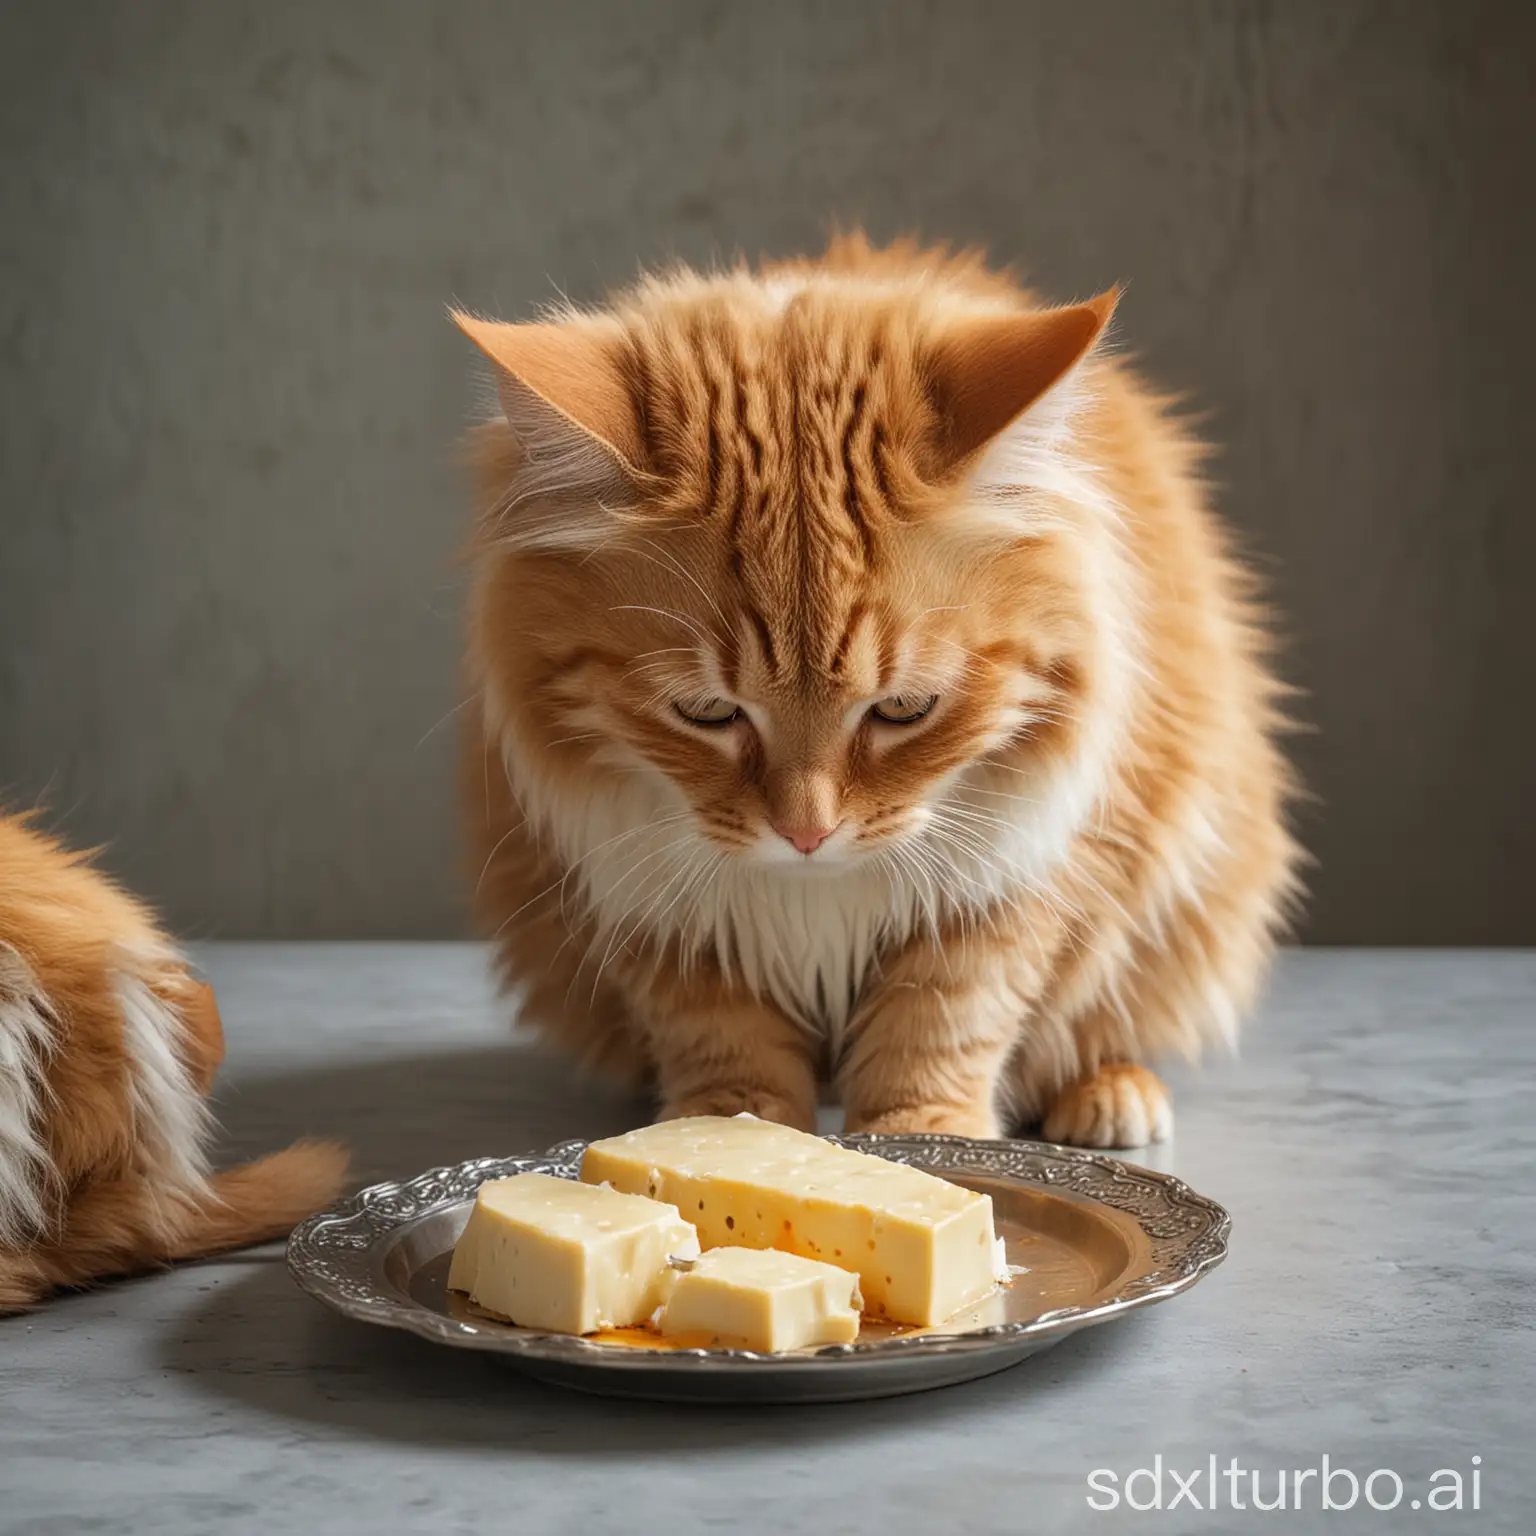 Fluffy-Orange-Cat-Enjoying-Cheese-from-Silver-Plate